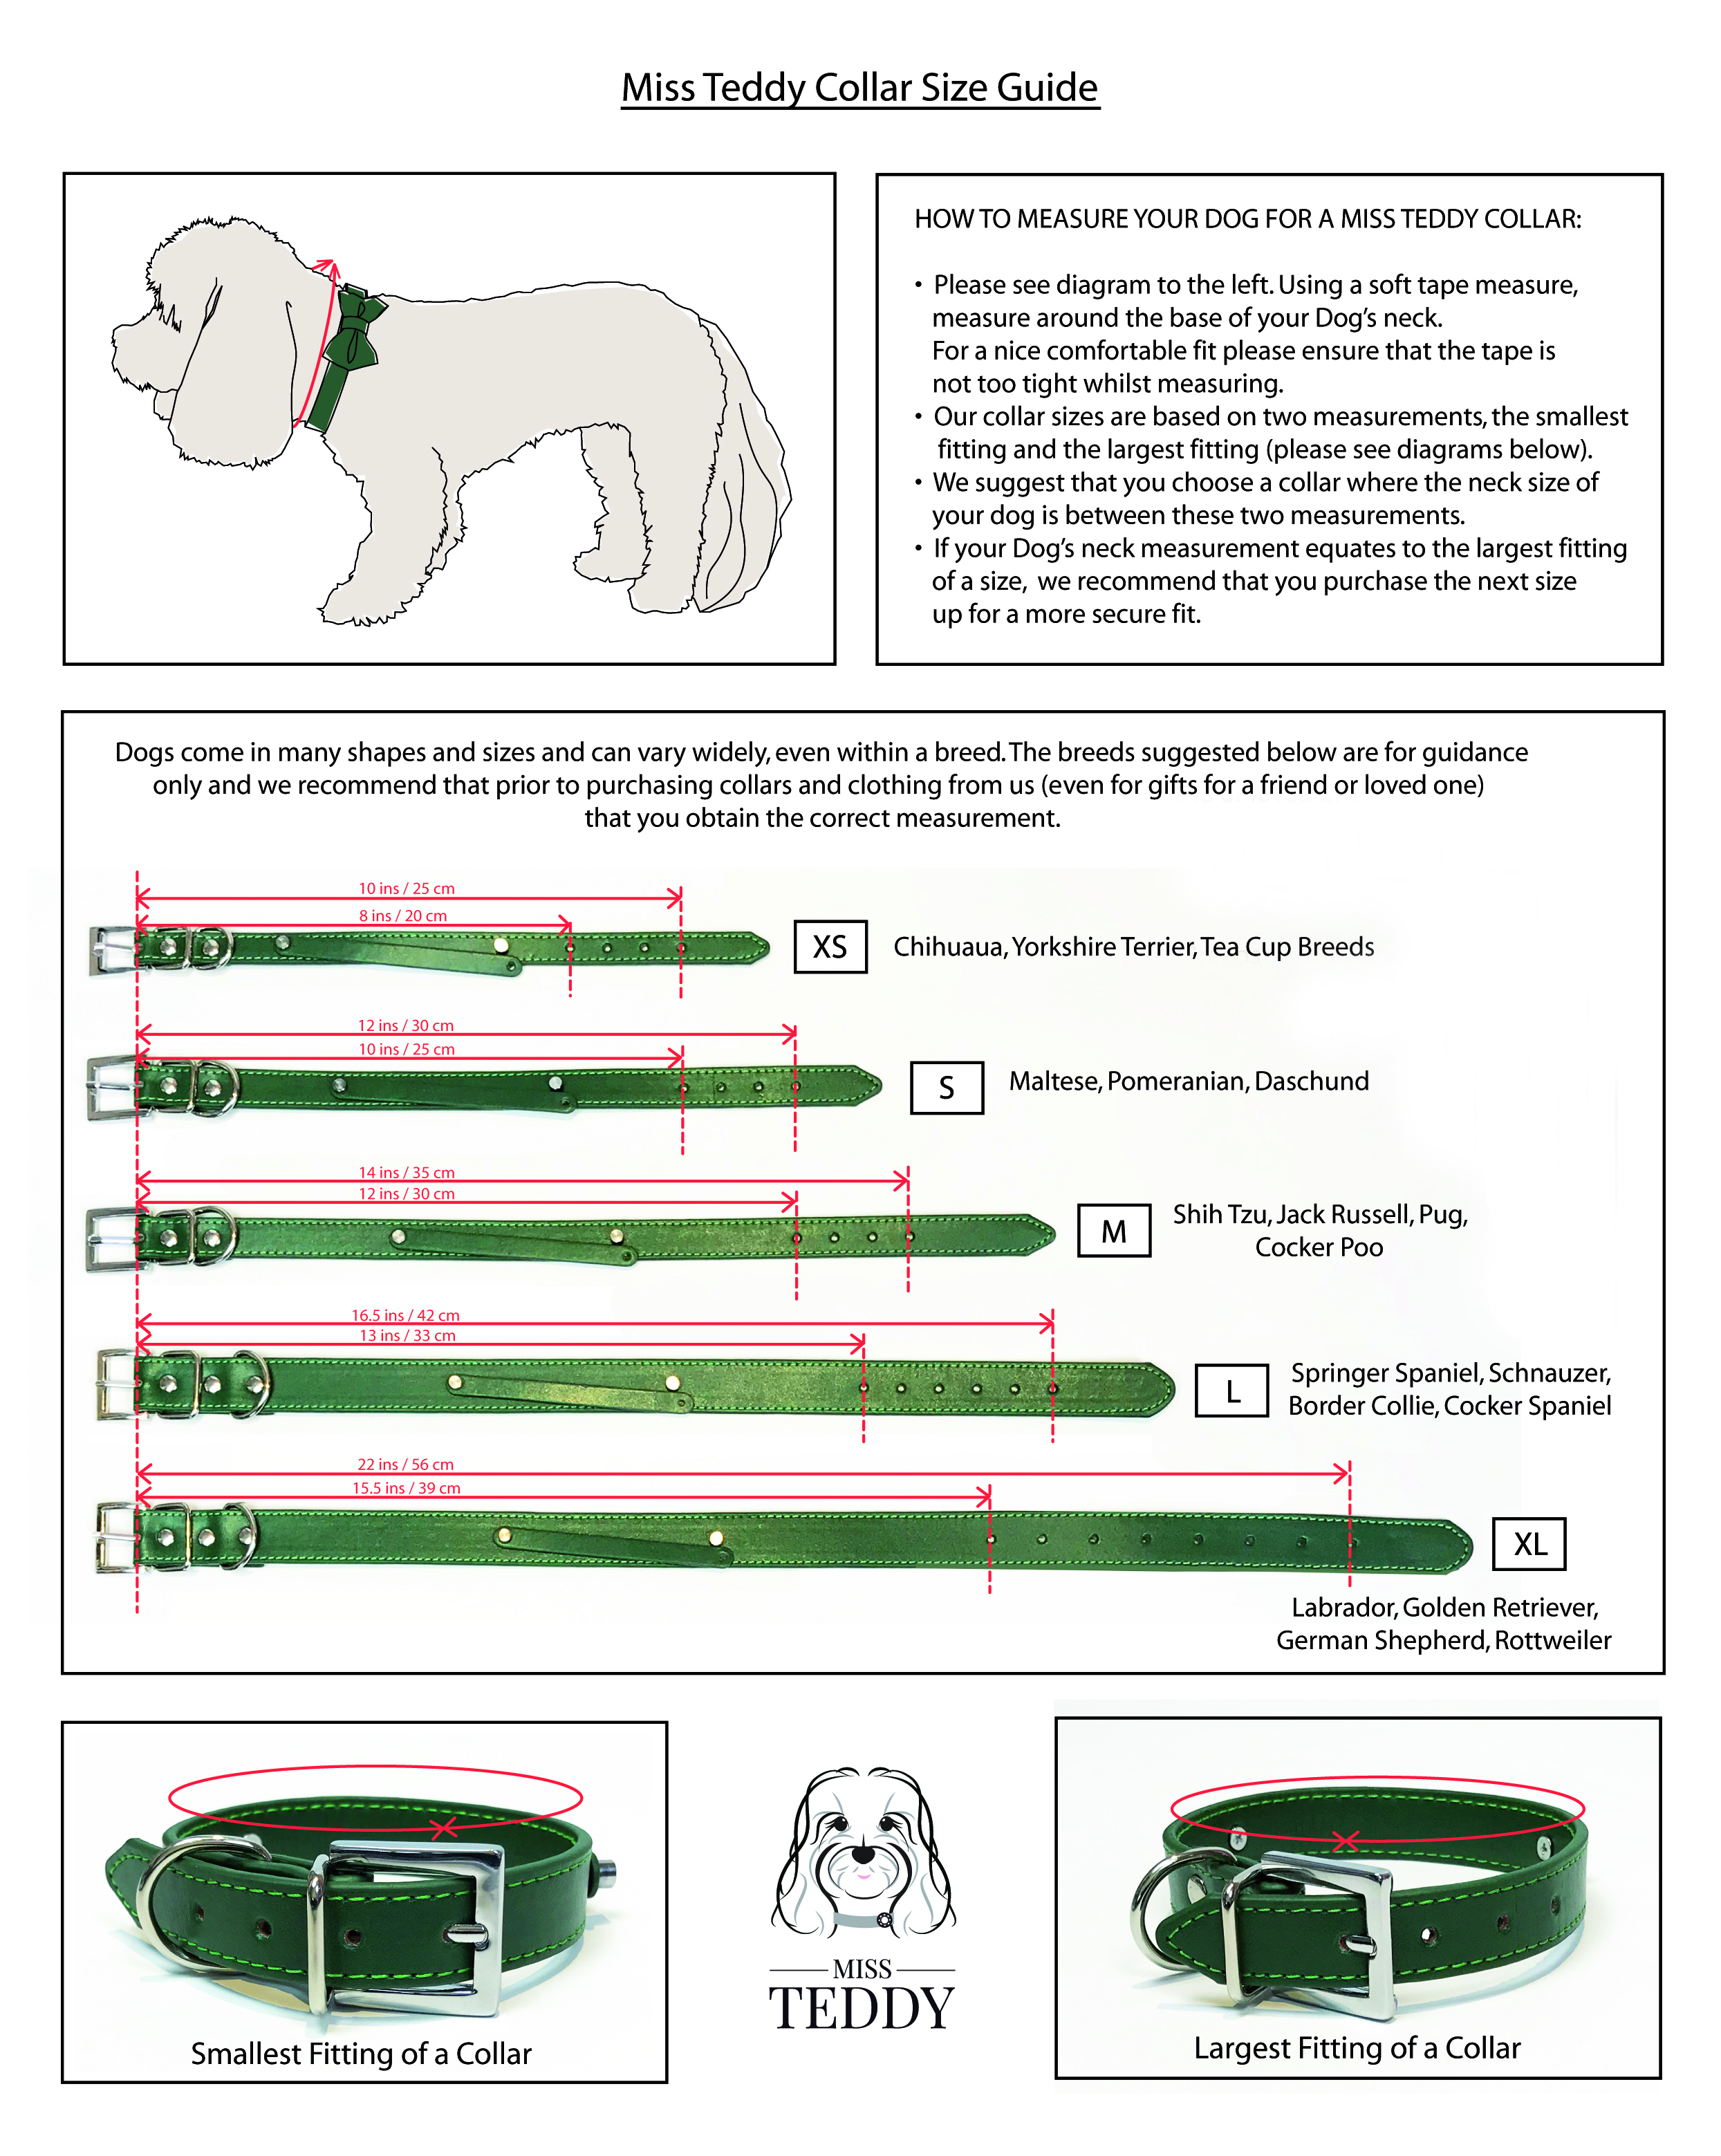 Dog Collar Size Chart By Breed